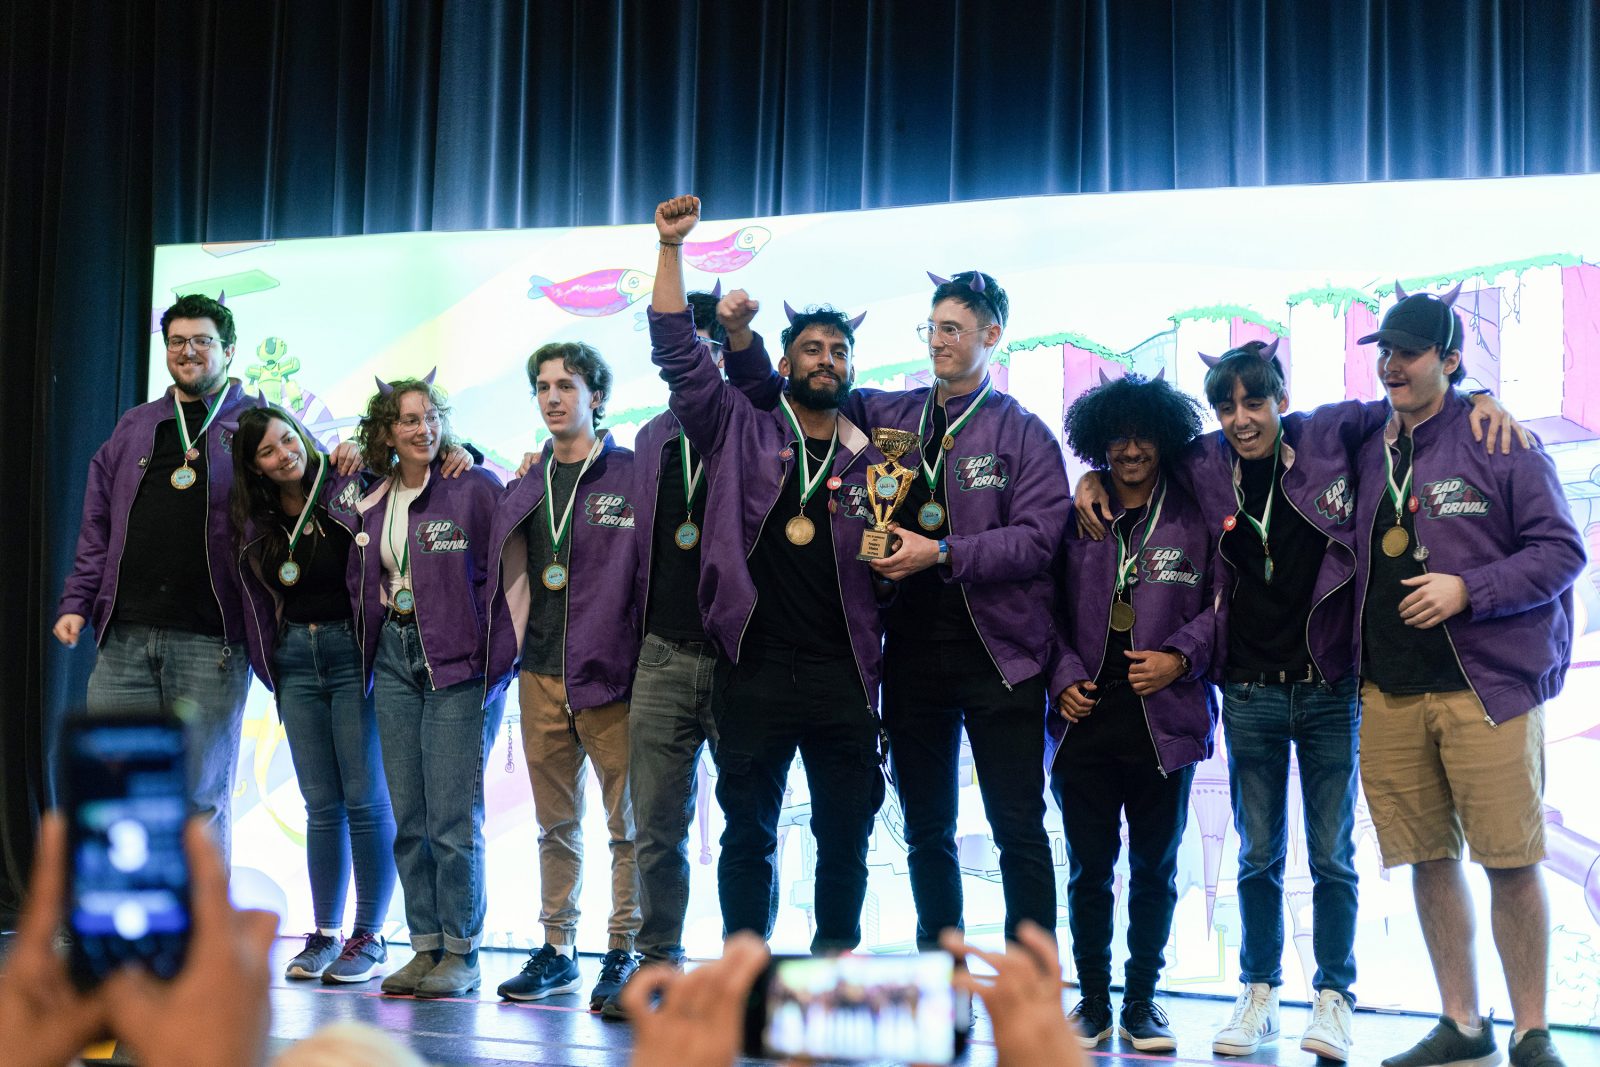 A group of people stand, arms linked, on a stage in front of a white digital screen. The people are wearing matching purple jackets and smiling, each with a medal around their neck. A person in the middle of the group holds a trophy with his arm raised.